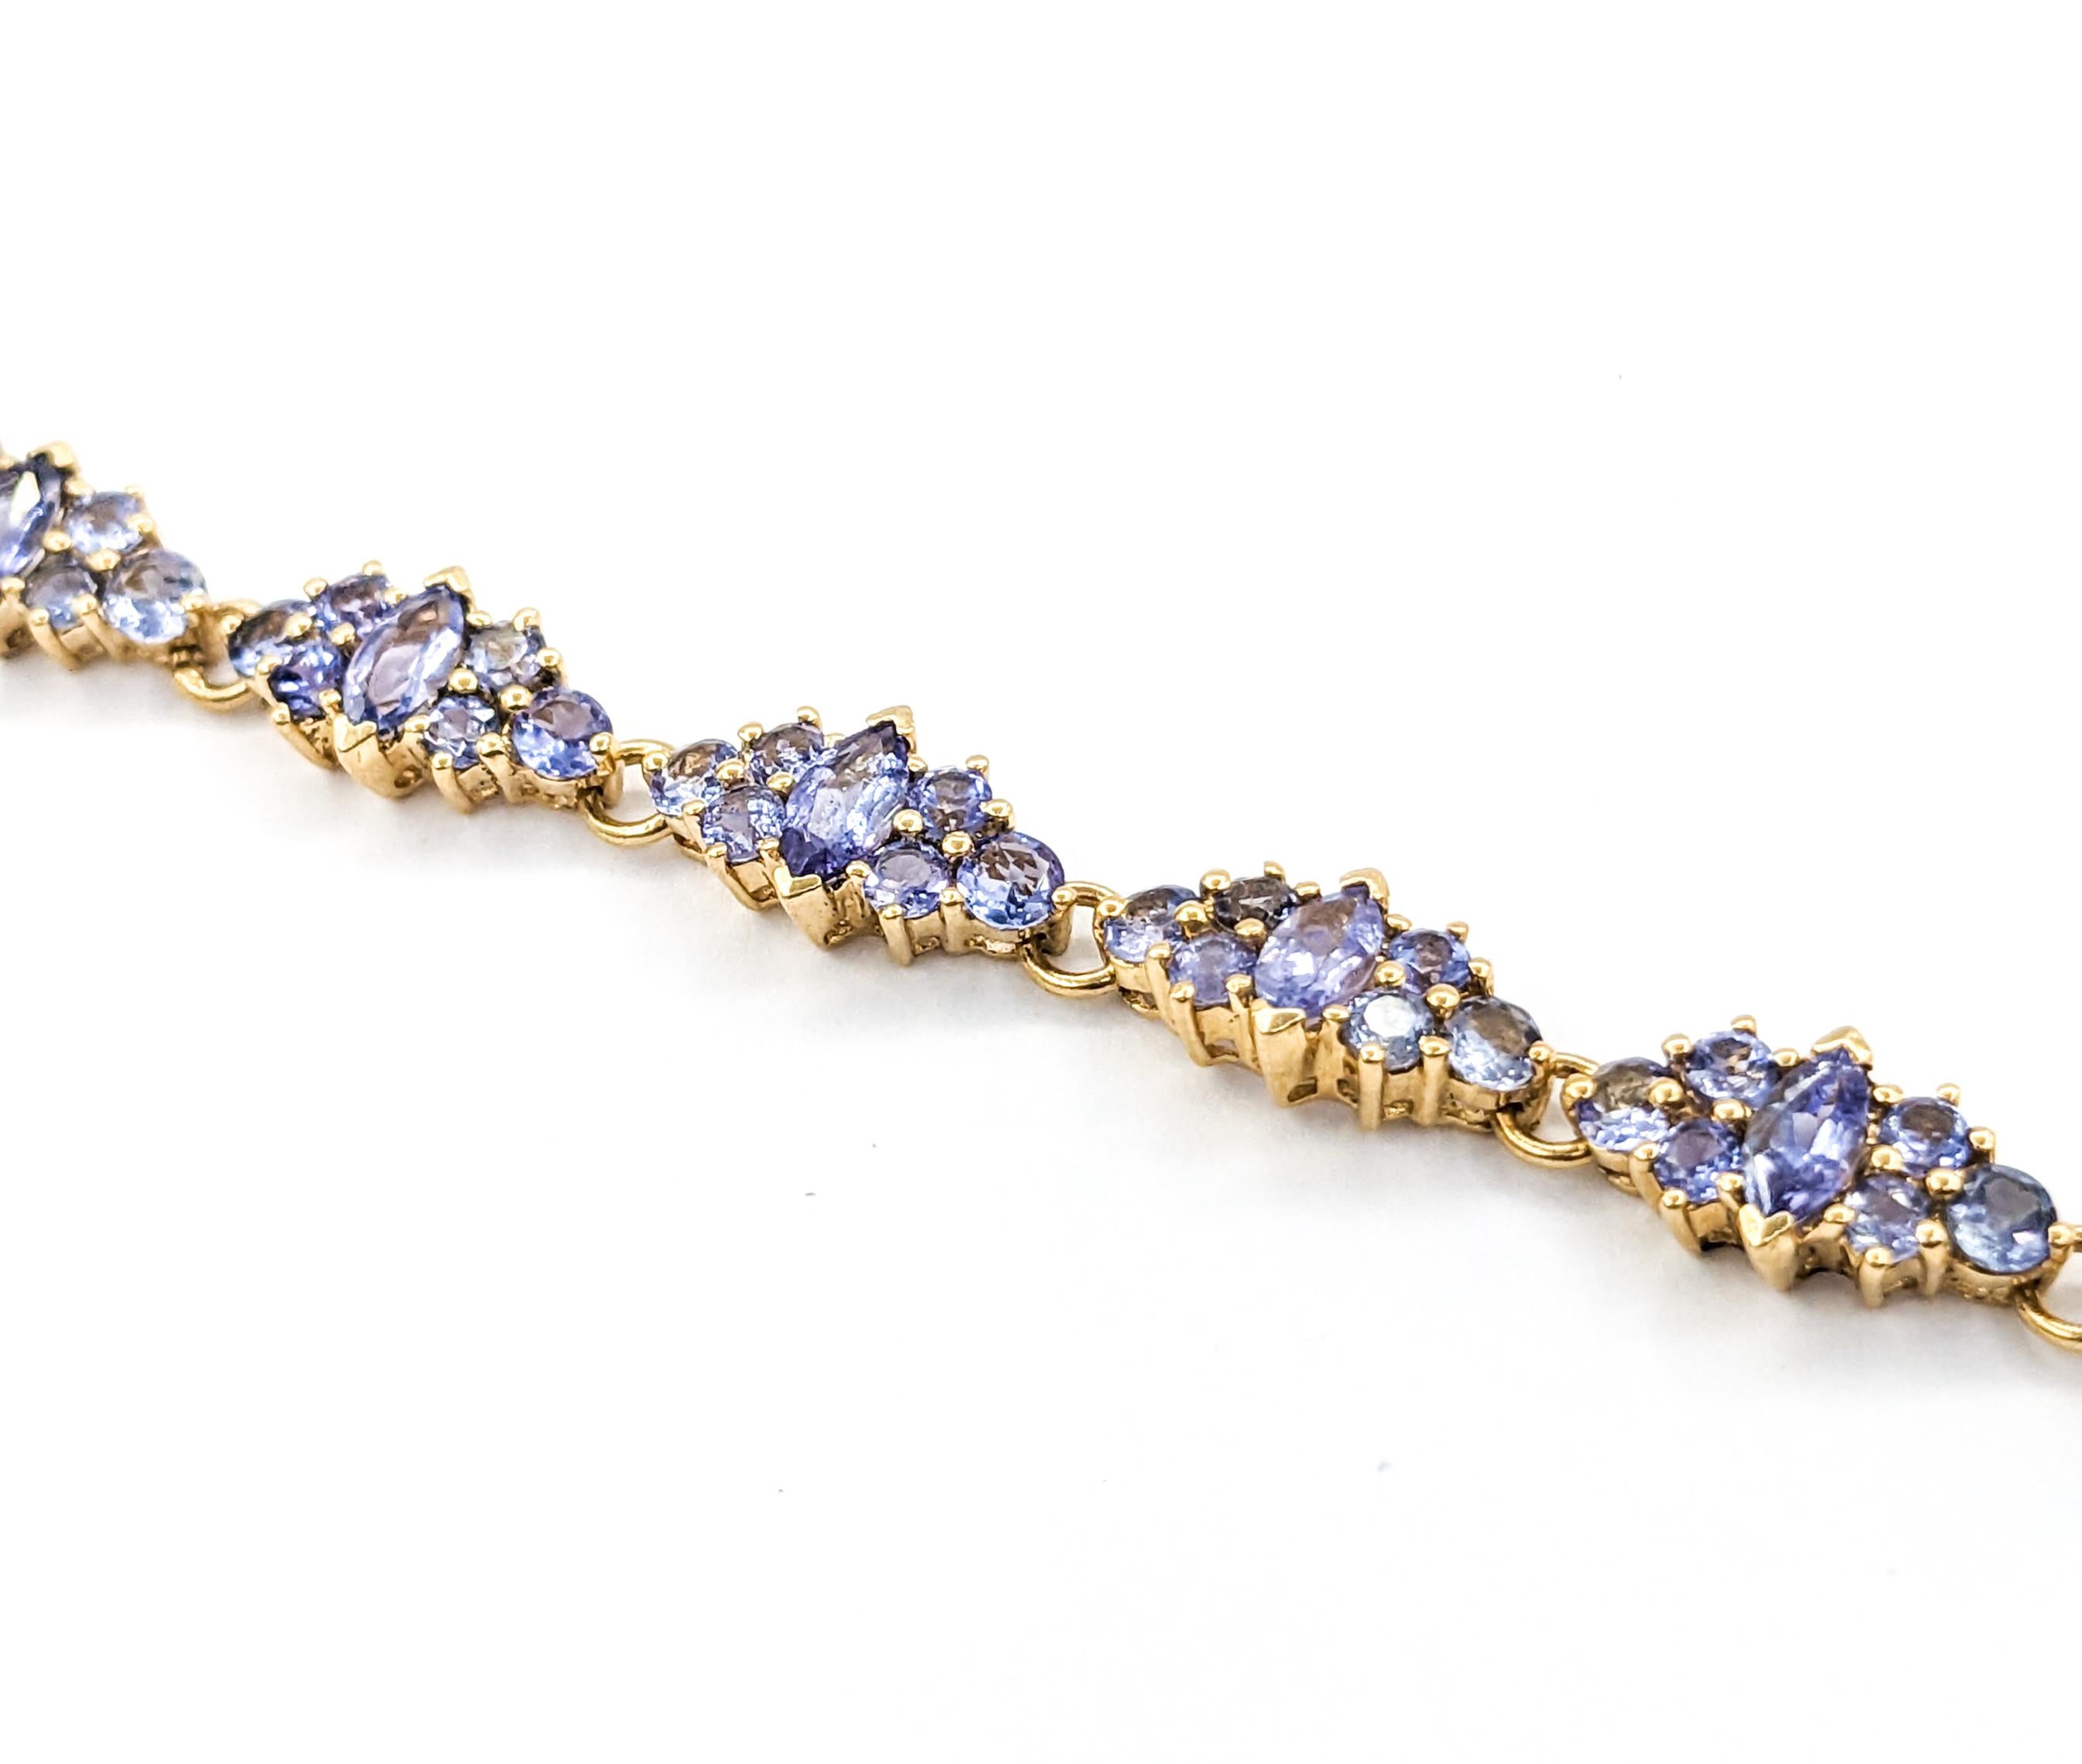 14.5ctw Tanzanite Bracelet In Yellow Gold

Introducing this stunning Gemstone Fashion Bracelet beautifully crafted in 14kt yellow gold. This elegant piece is adorned with 14.5 carats of tanzanite, showcasing deep, vibrant hues that captivate and